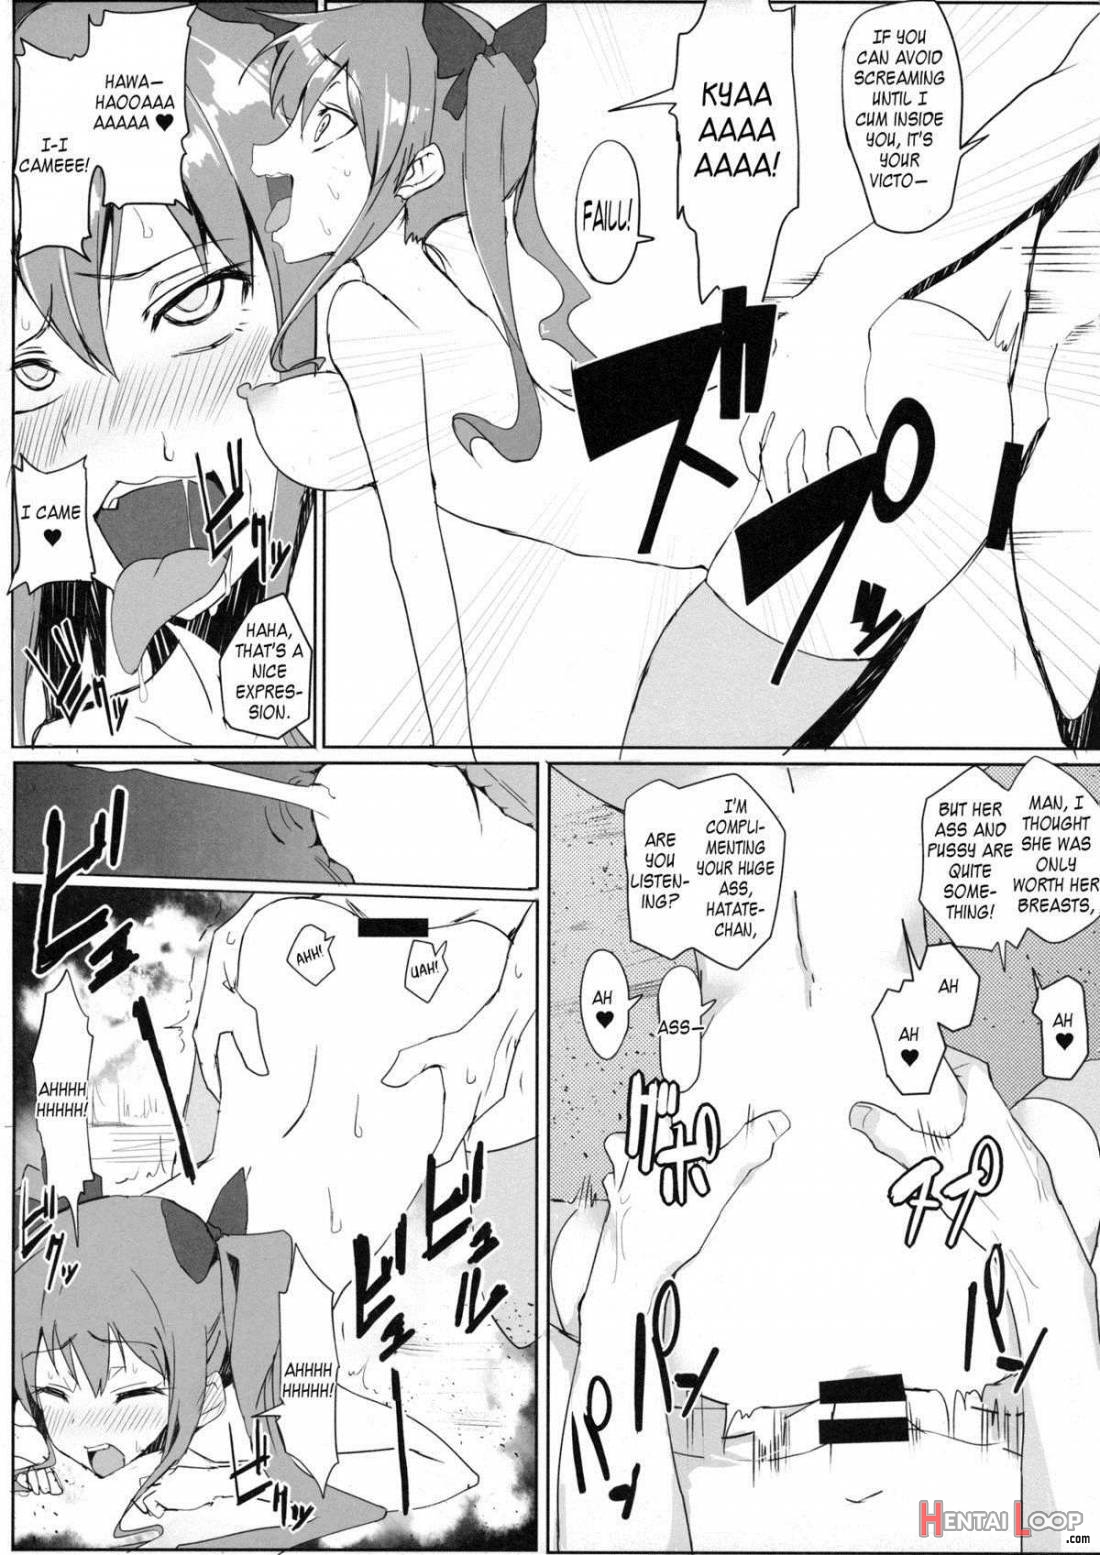 Hatate-chan No Arbeit page 18